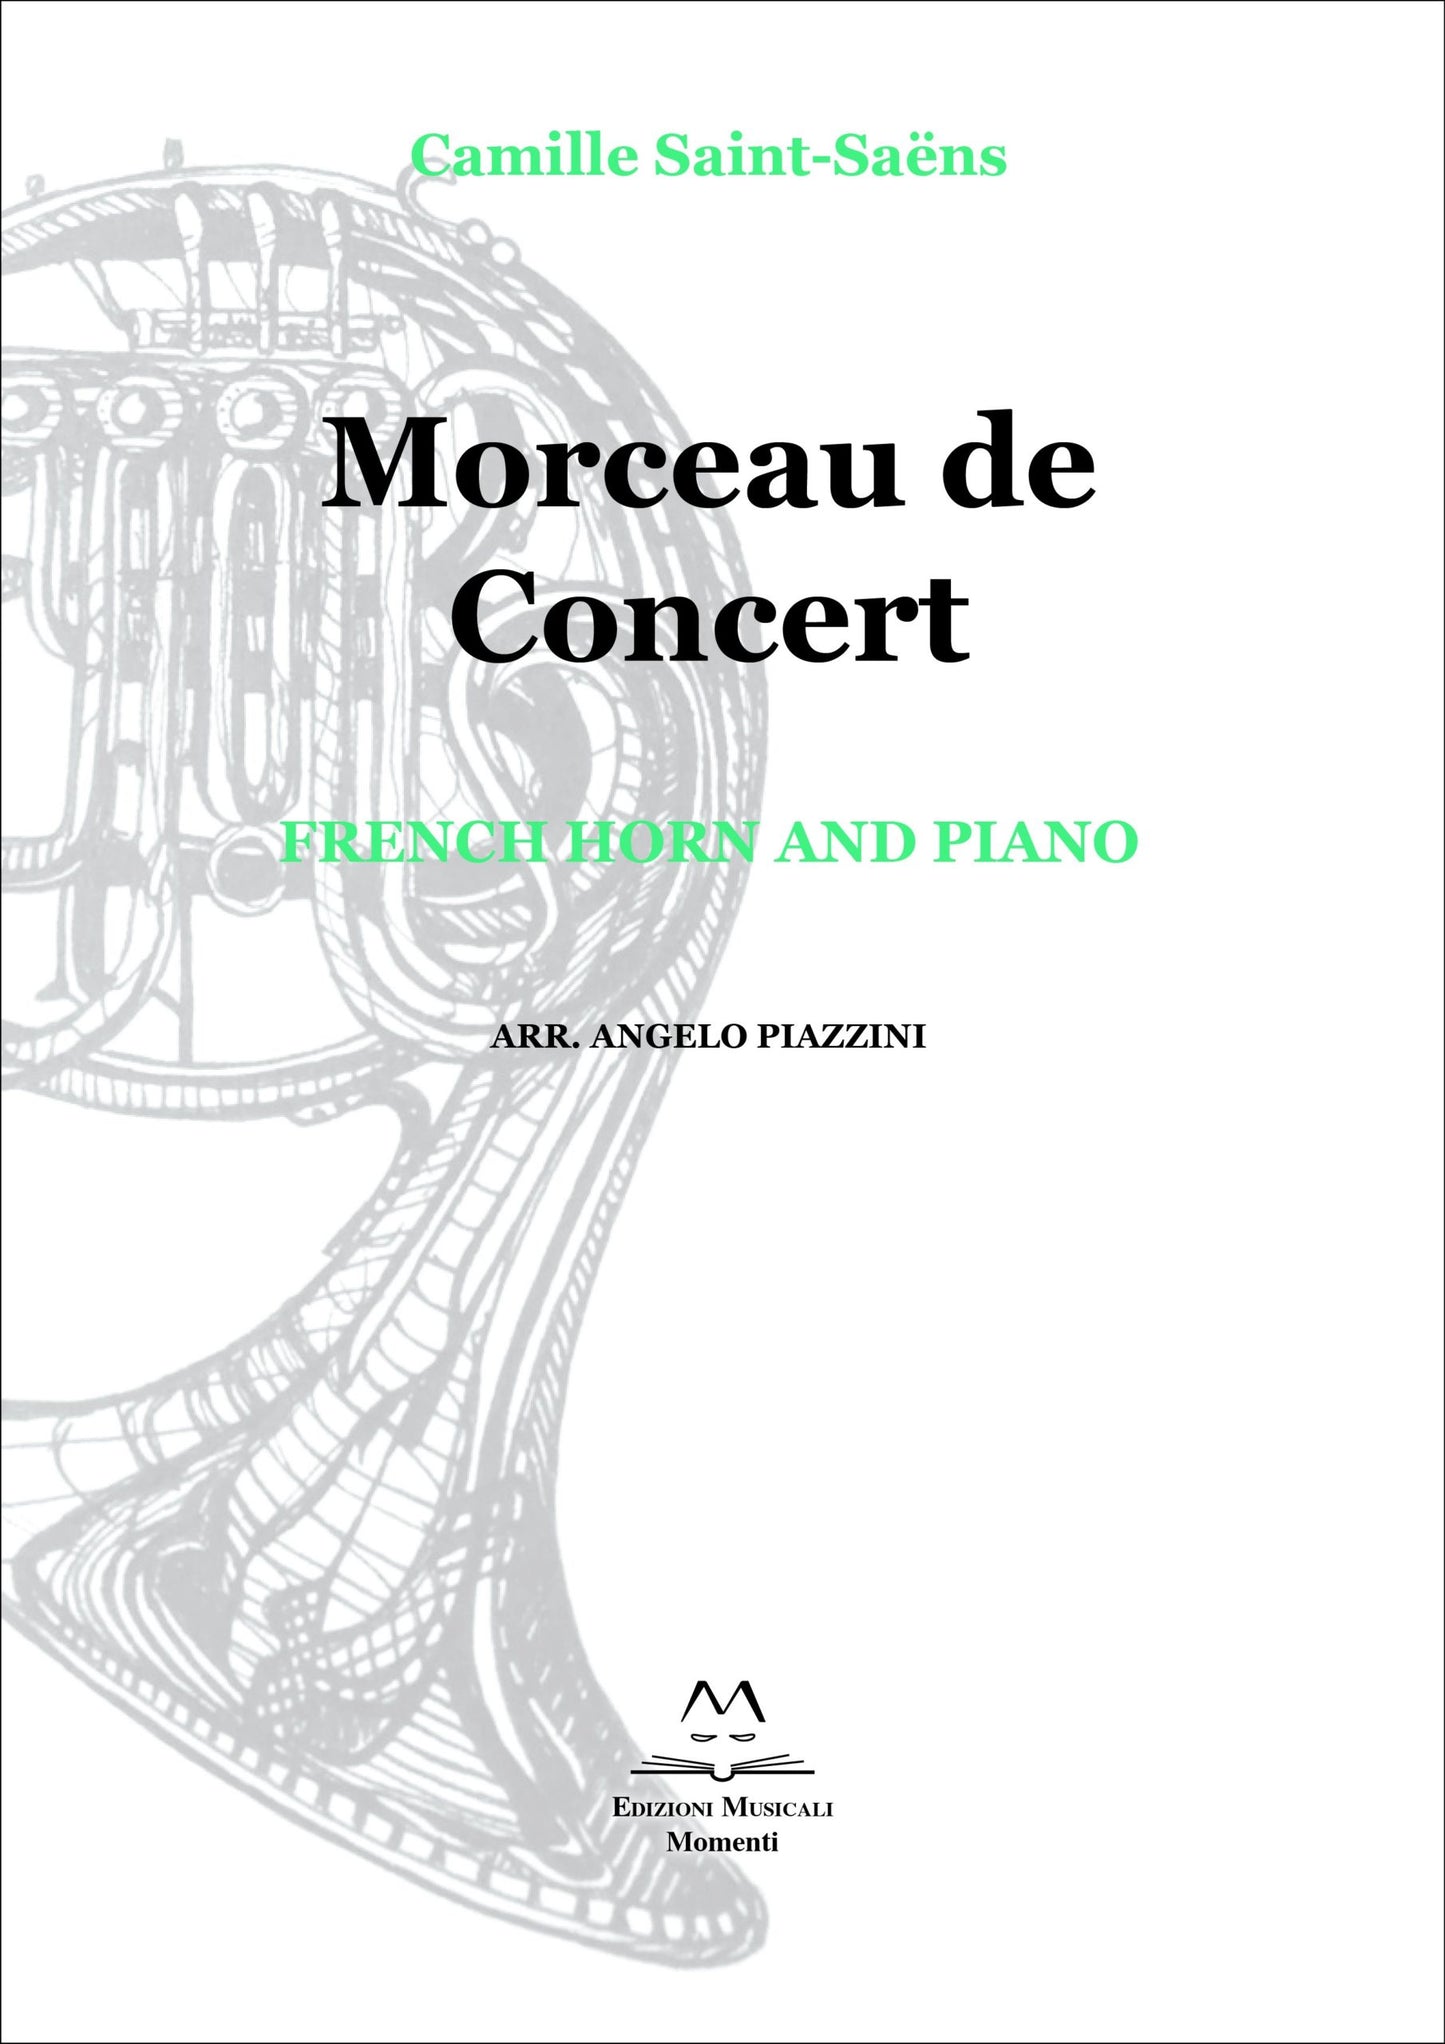 Morceau de Concert - French horn and Piano arr. Angelo Piazzini